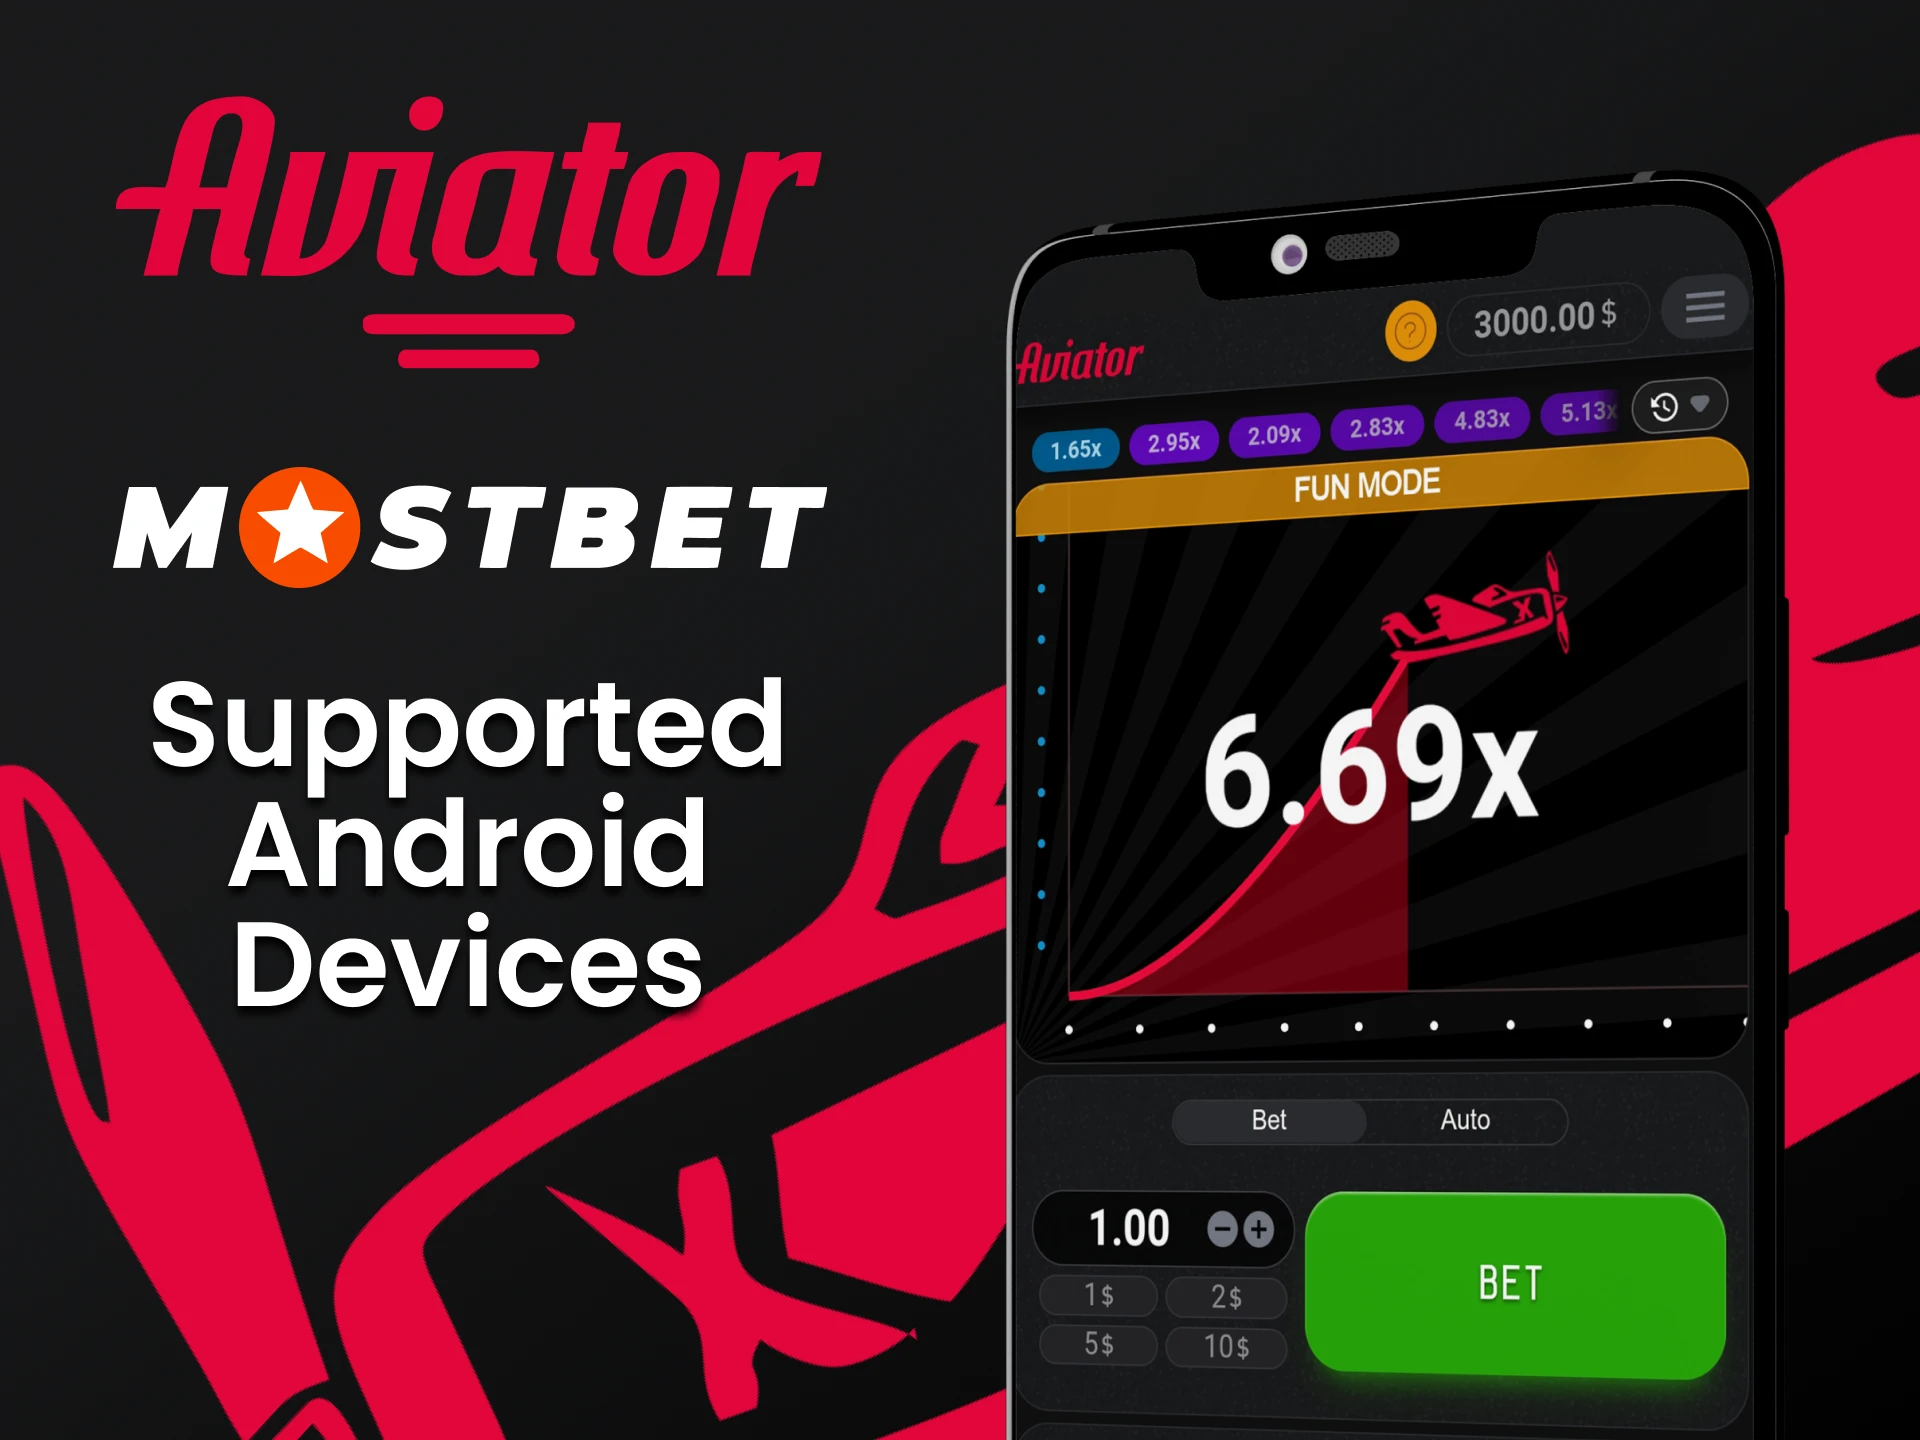 Play Aviator through the Mostbet app on your android device.